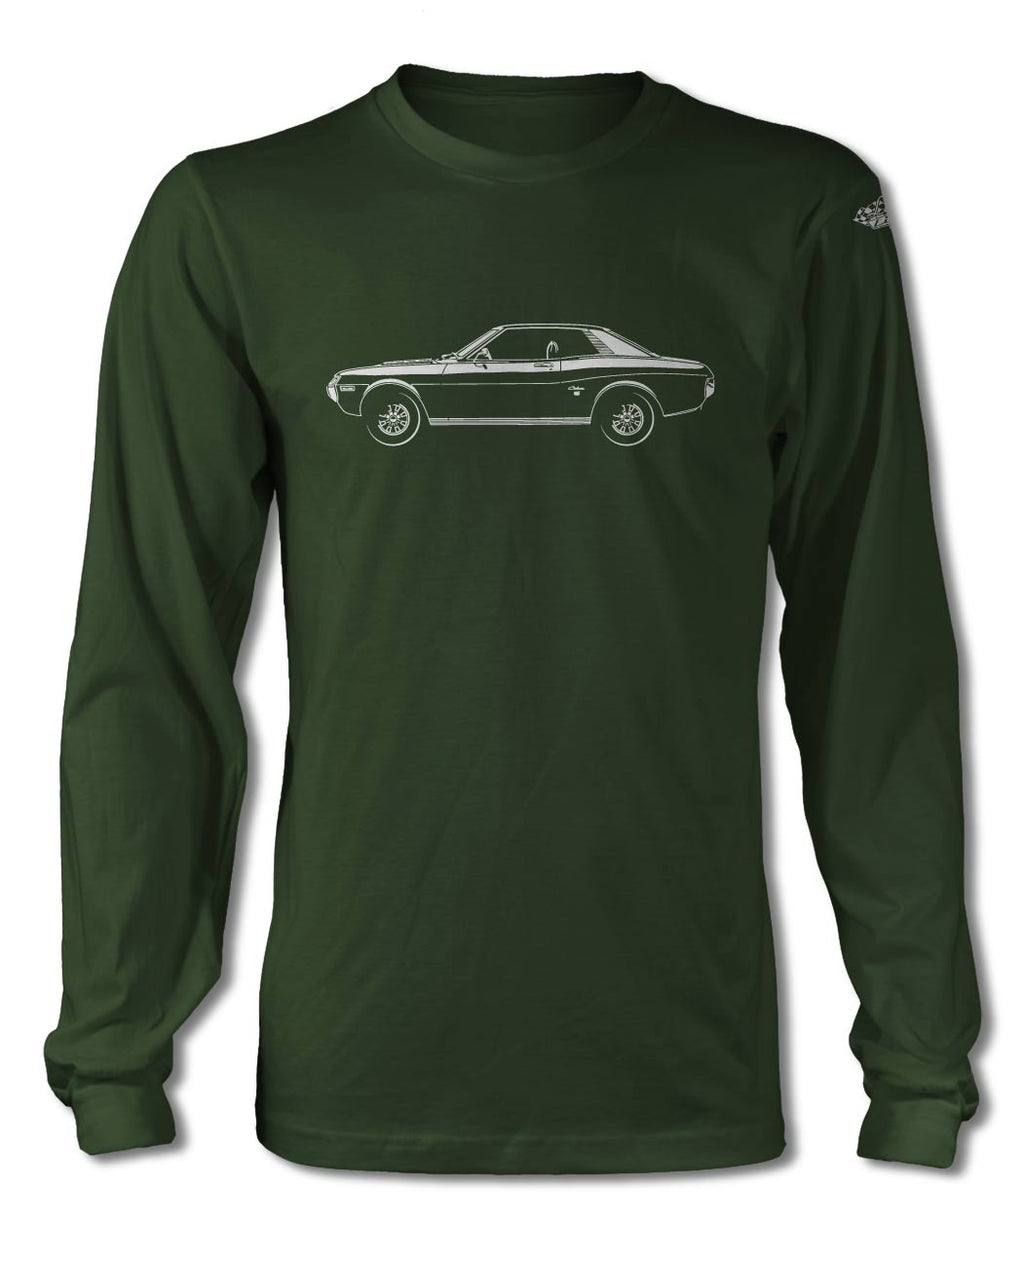 Toyota Celica Hardtop Coupe 1970 – 1977 T-Shirt - Long Sleeves - Side View